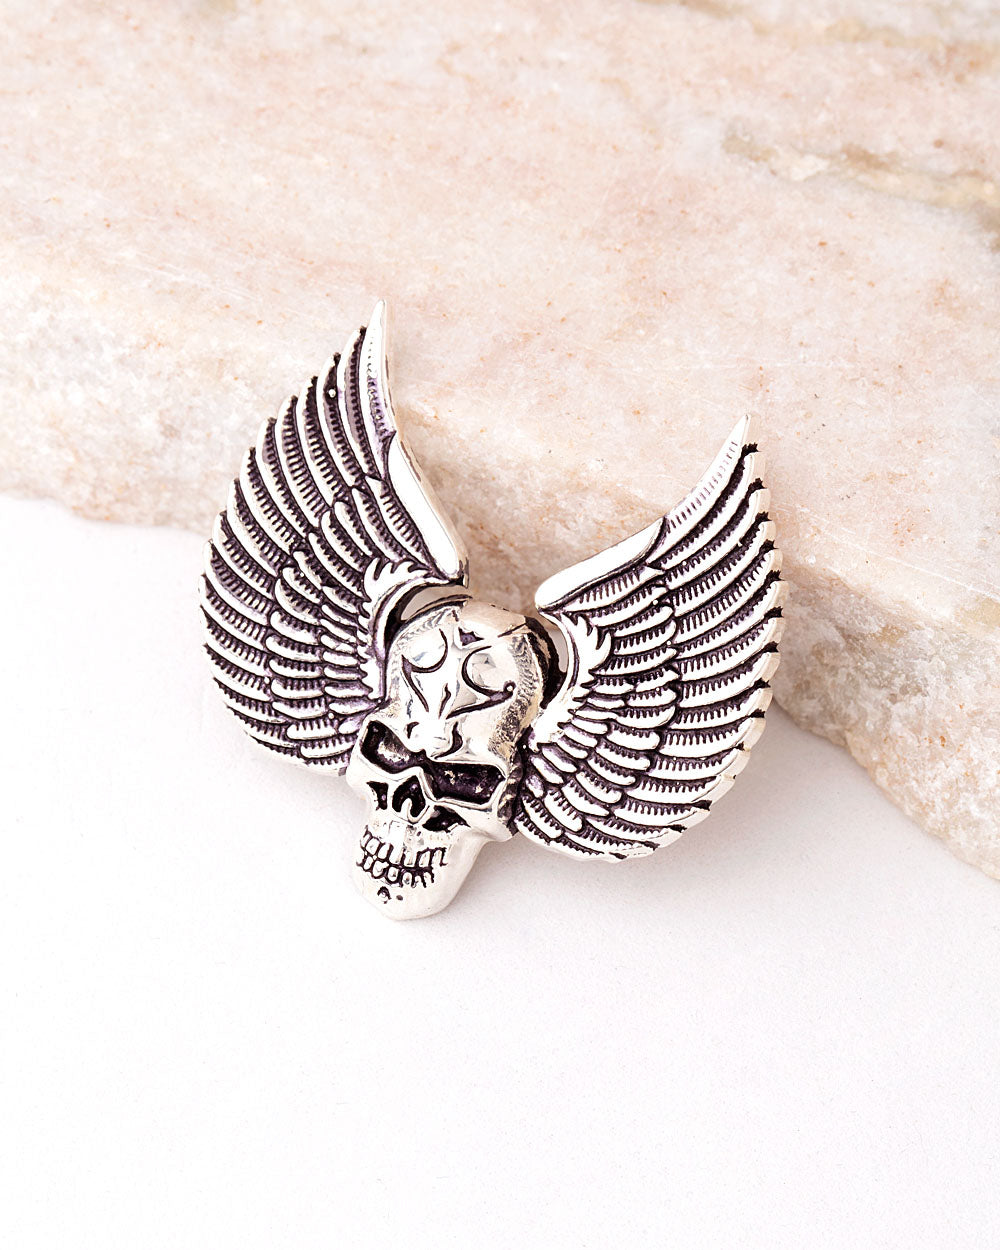 Halloween Collection Skull and Wings Brooch